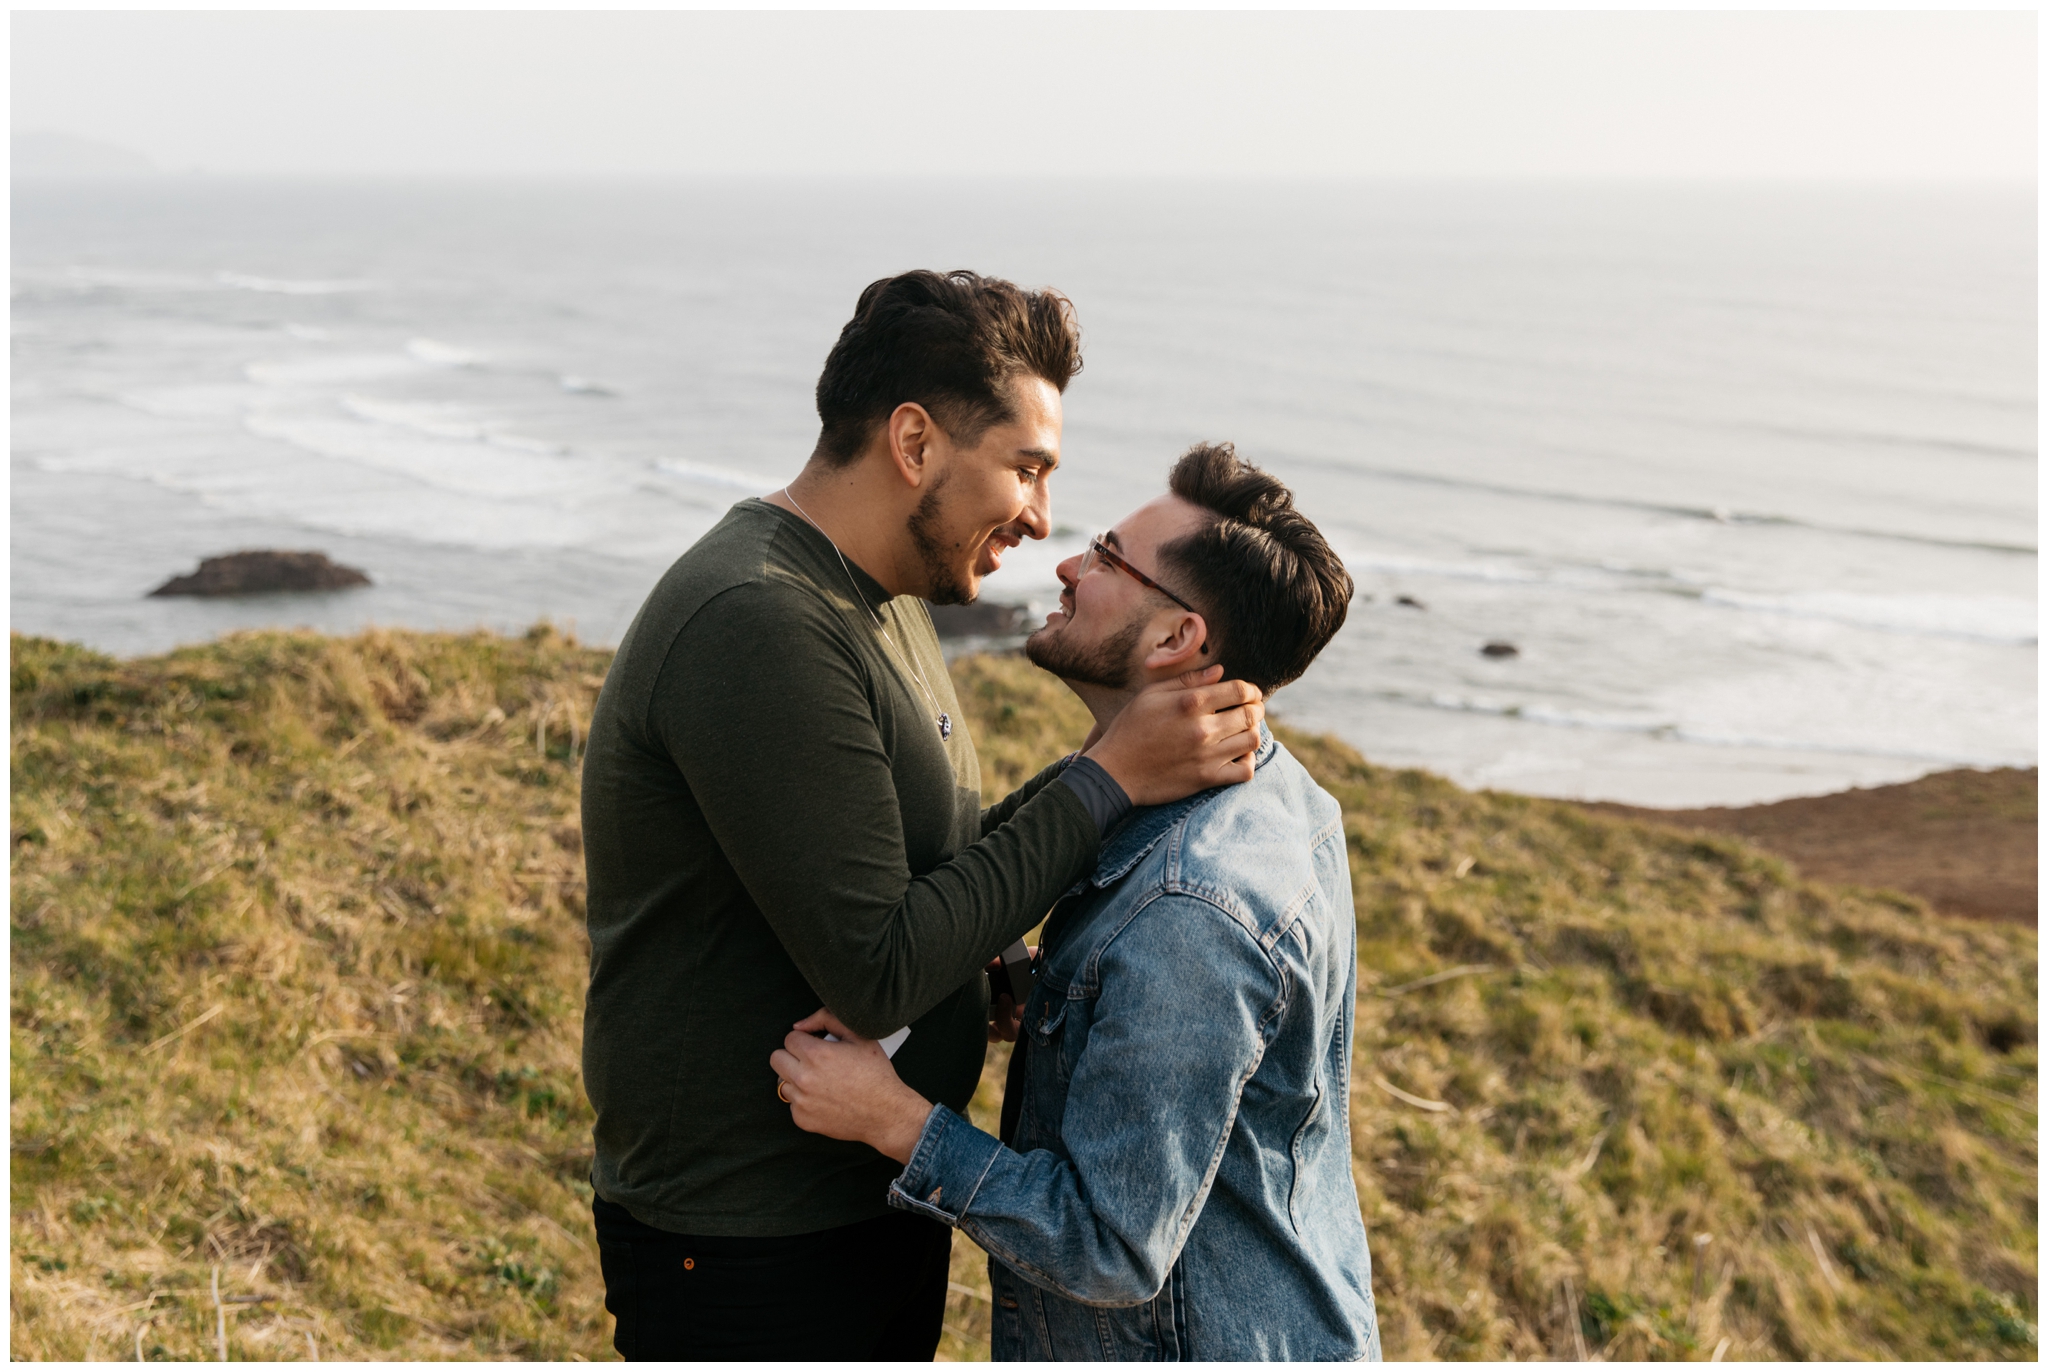 Cannon Beach Engagement With Brittney Hyatt Photography Seattle Wedding and Elopement Photographer. Same-sex couple proposes to each other at Ecola State Park on a cliff side overlooking Cannon Beach. 